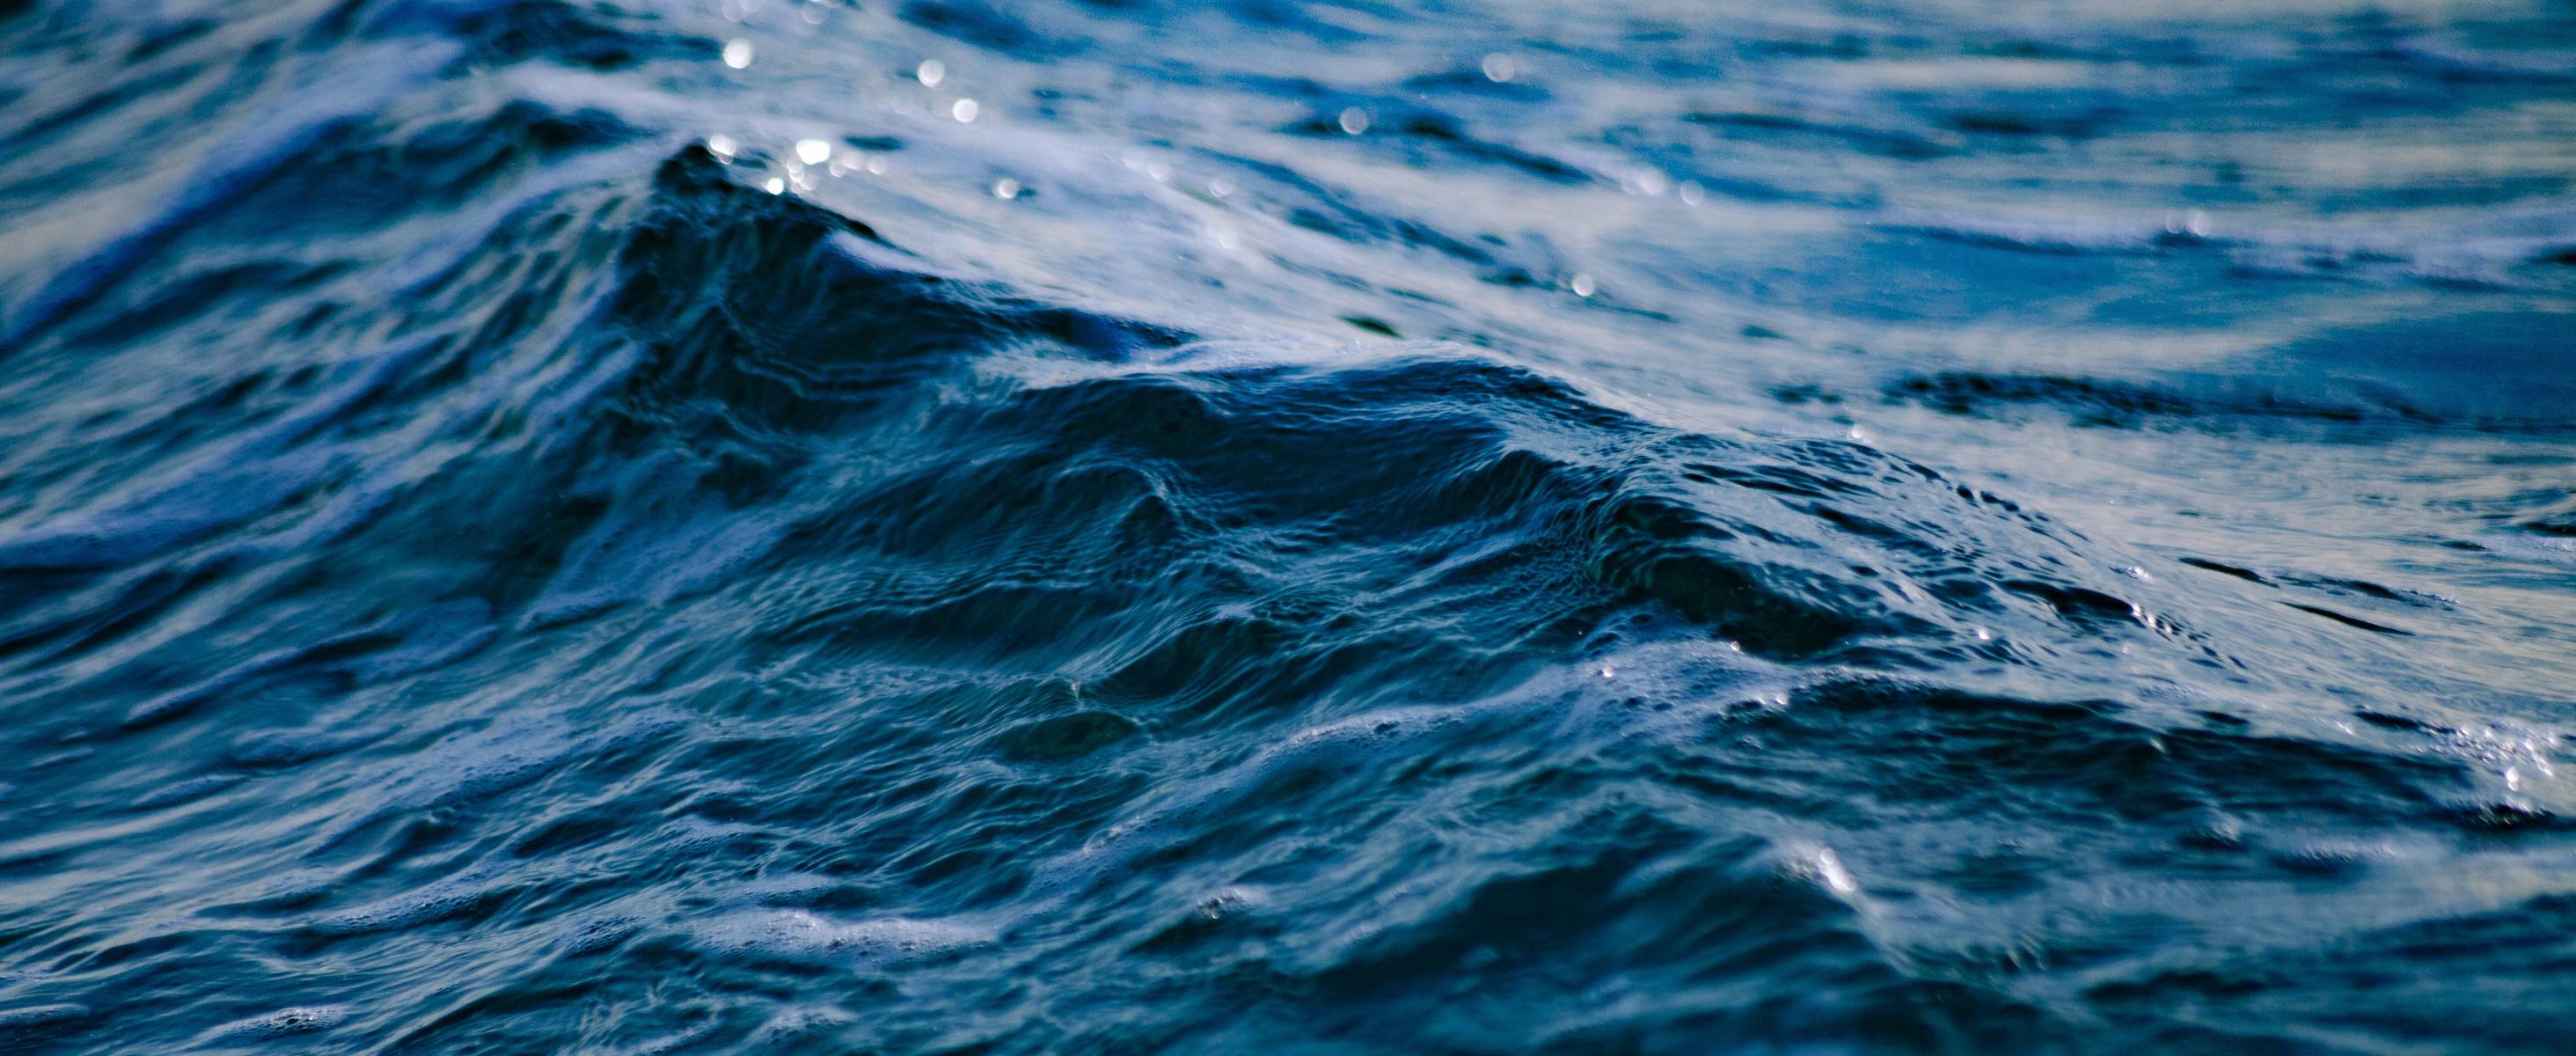 A close-up shot of water rippling in the ocean